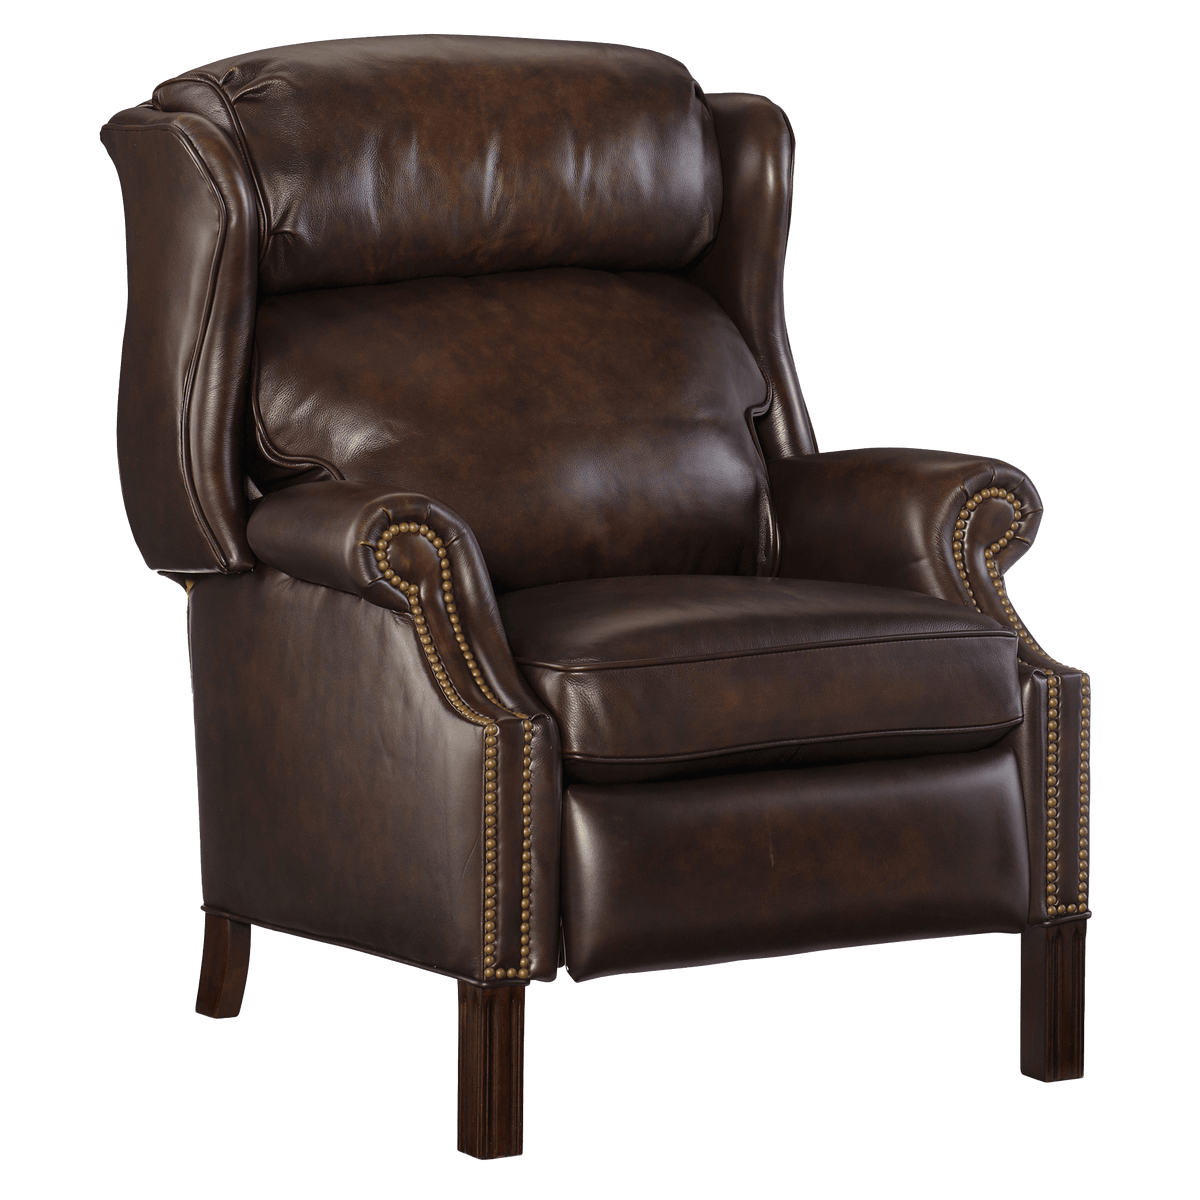 Correne Recliner Chair, Leather, Brown - Coja